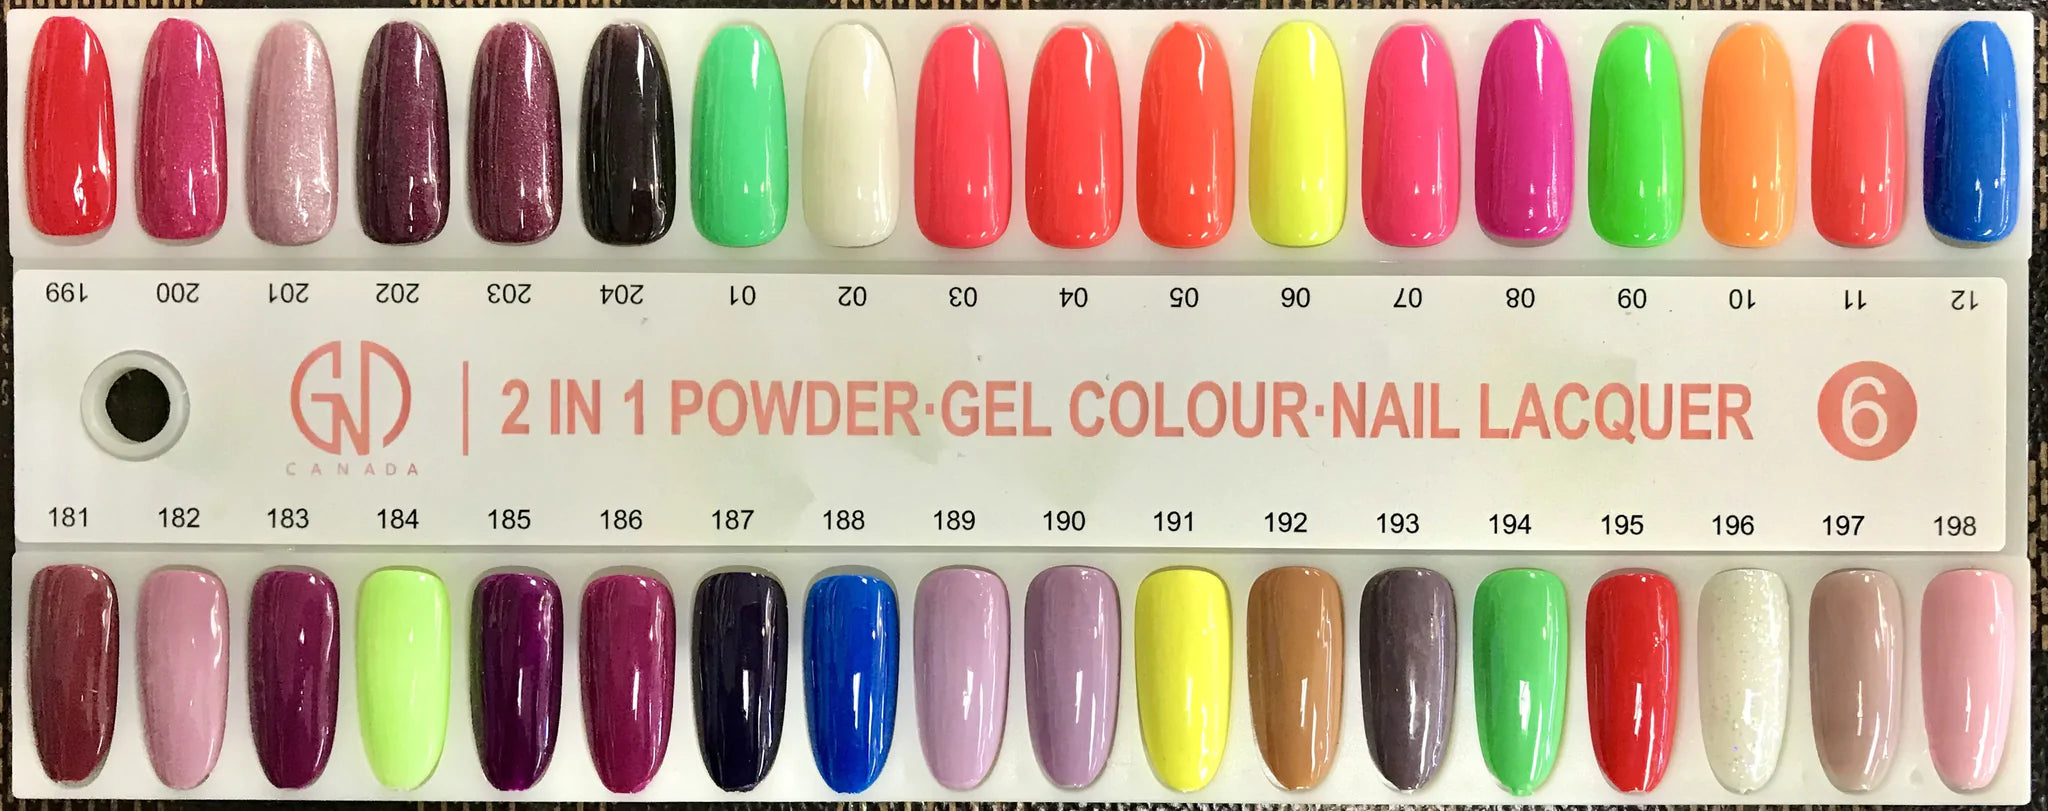 GND Duo Gel & Lacquer 181